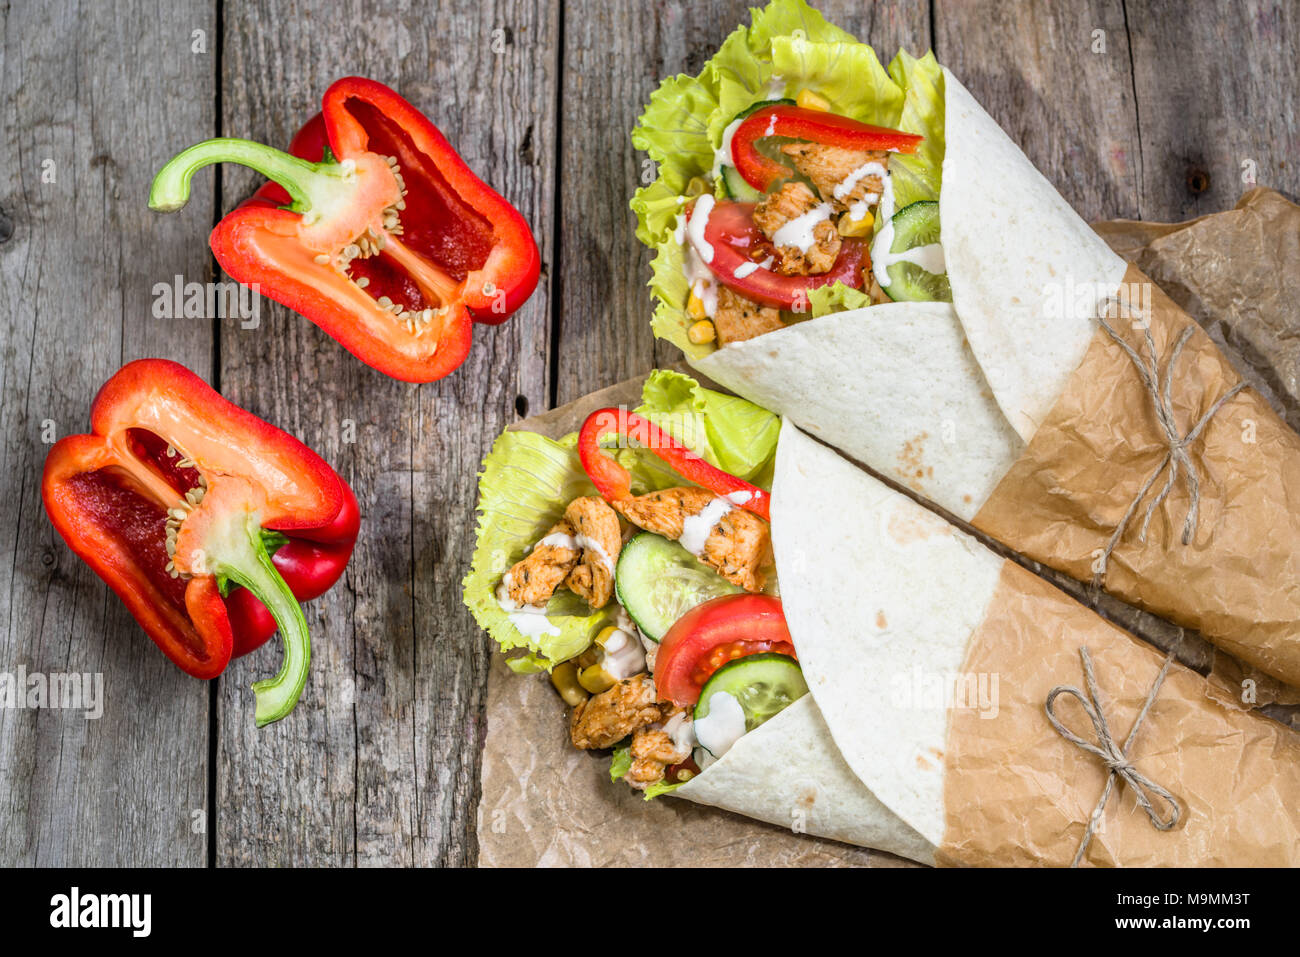 Tortilla wraps with fresh vegetables and grilled chicken meat, tex-mex cuisine Stock Photo